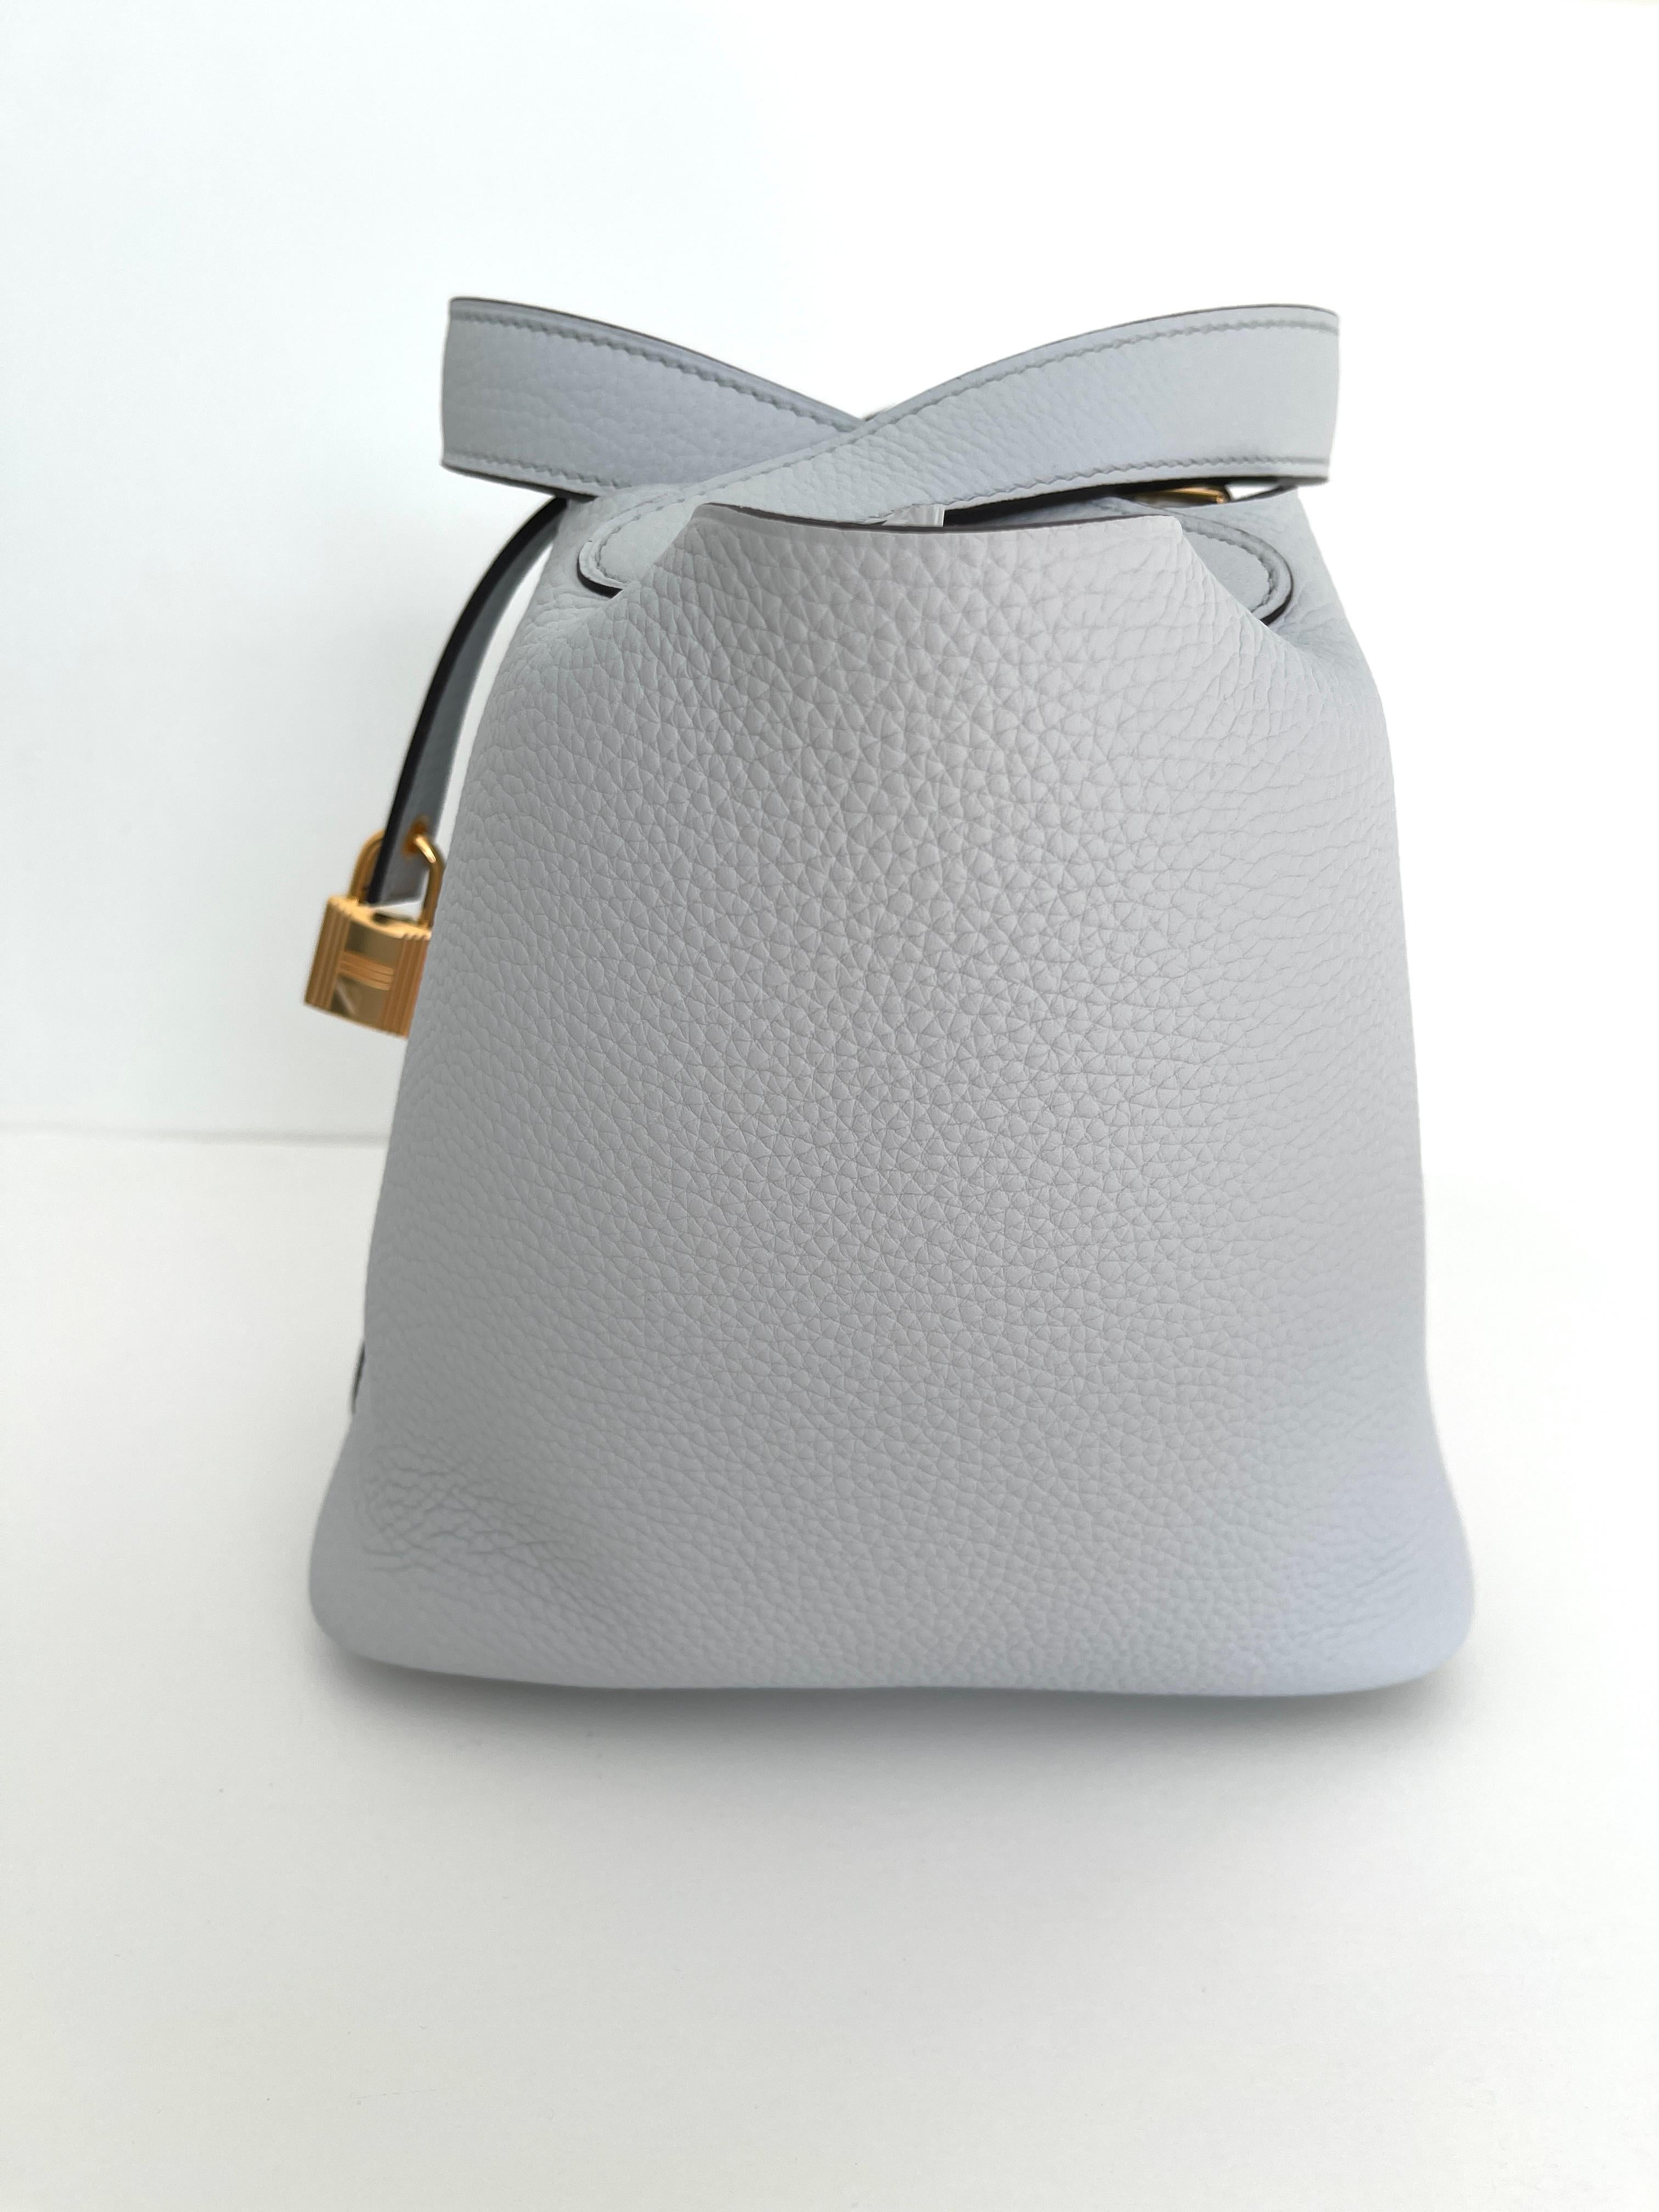 Hermes Picotin Lock
18cm Size
This is the small one, the most wanted size 18cm
Blue Pale Clemence with Gold Hardware
Timeless
Its lining-less, clean-cut leather and plain, flexible handles make it the ultimate bag
Bag in taurillon Clemence leather